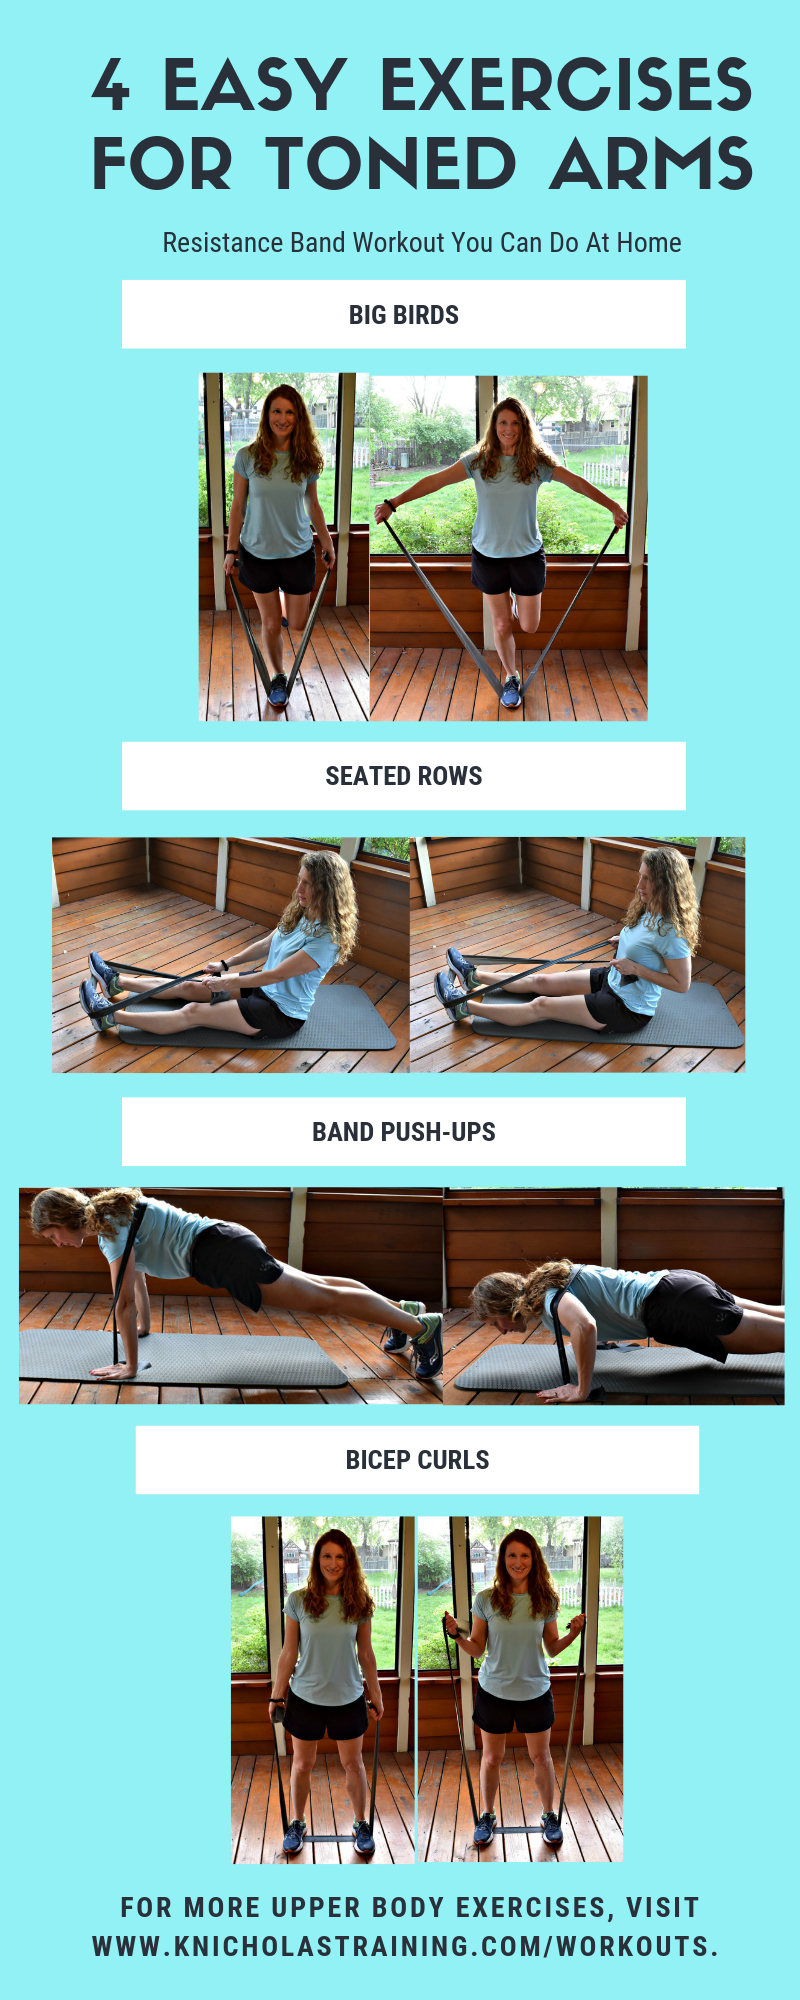 At Home Resistance Band Workout